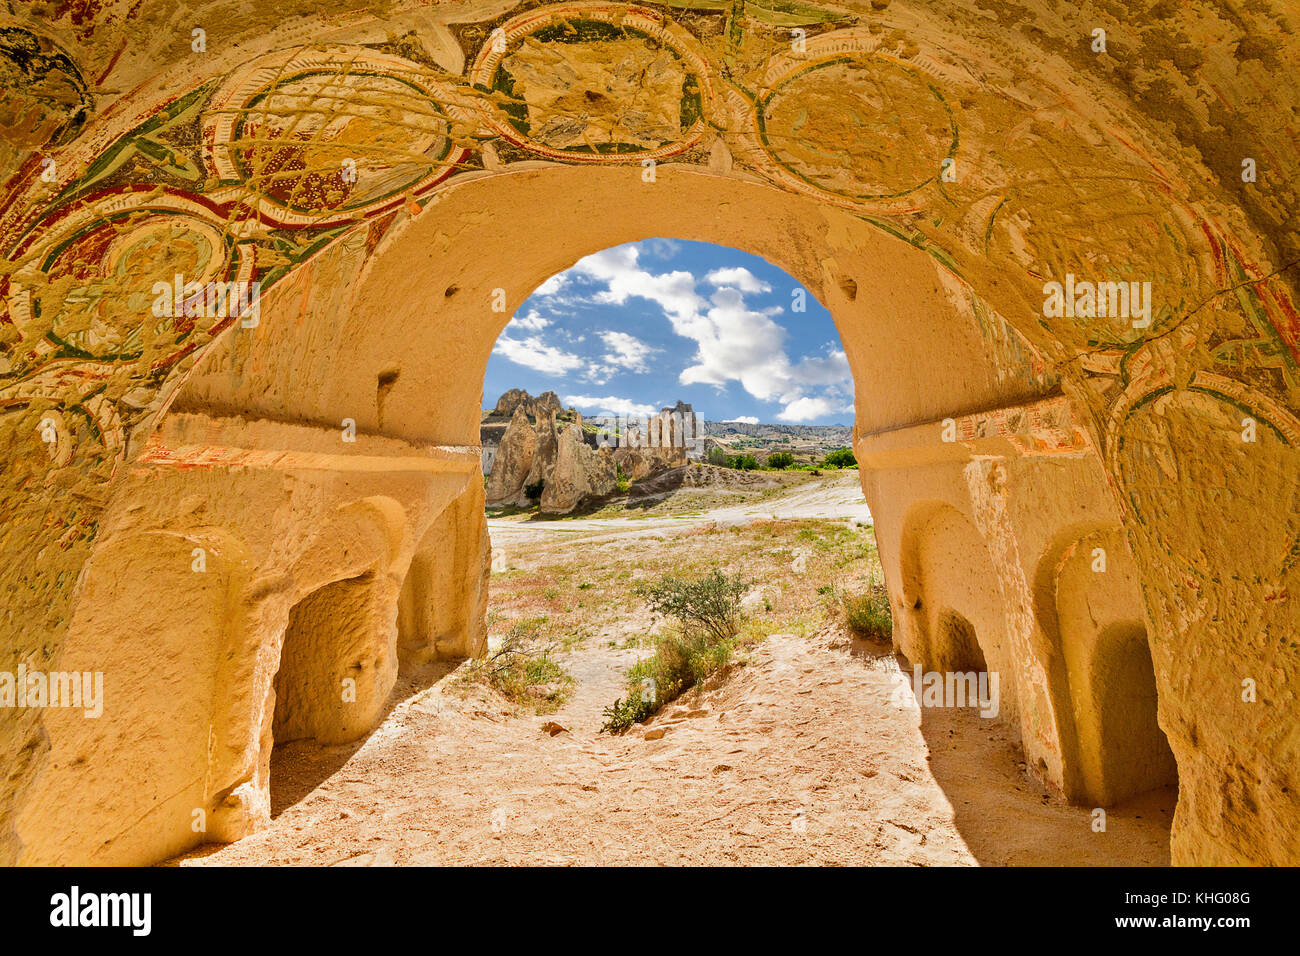 Rock cut church and its frescos with a view over the volcanic formations in the background, in Cappadocia, Turkey. Stock Photo